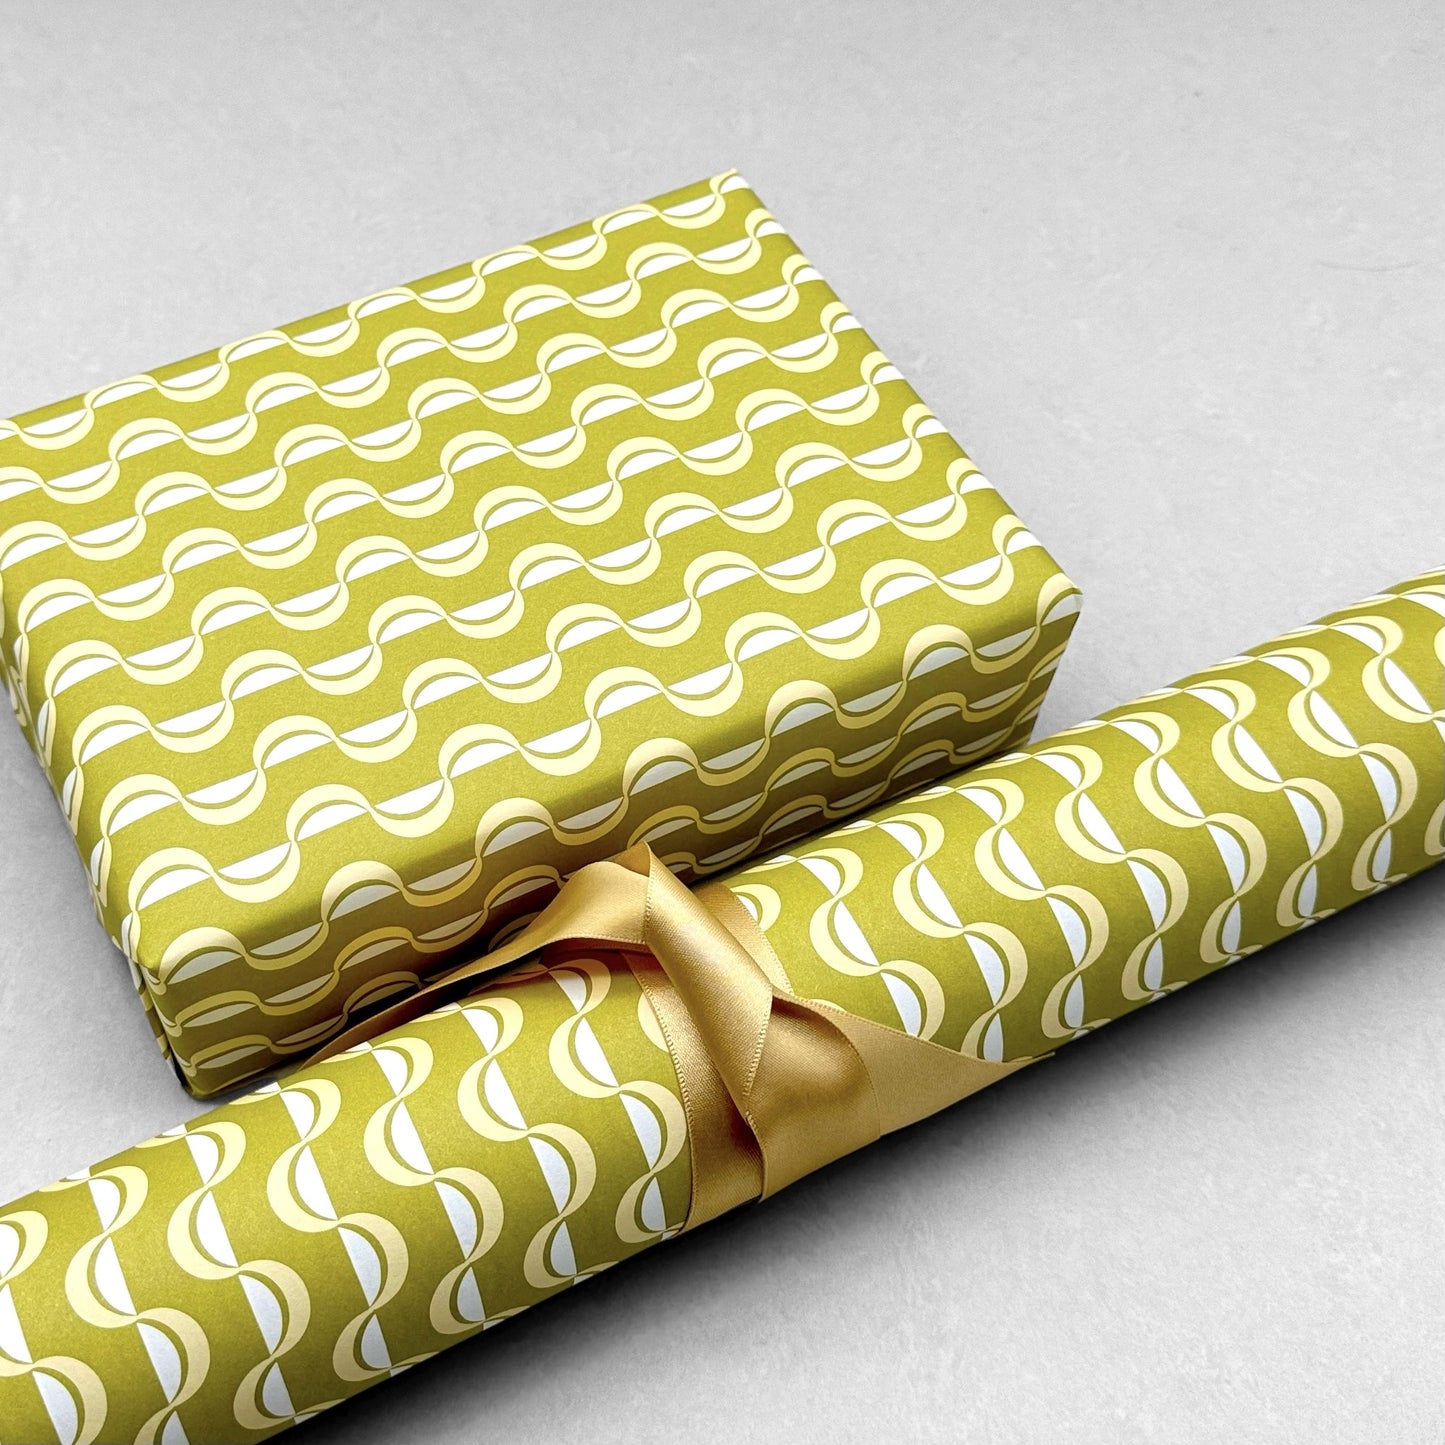 wrapping paper by ola studio with a wavy stripe design in chartreuse and lemon. Pictured wrapped with a roll of the paper alongside.